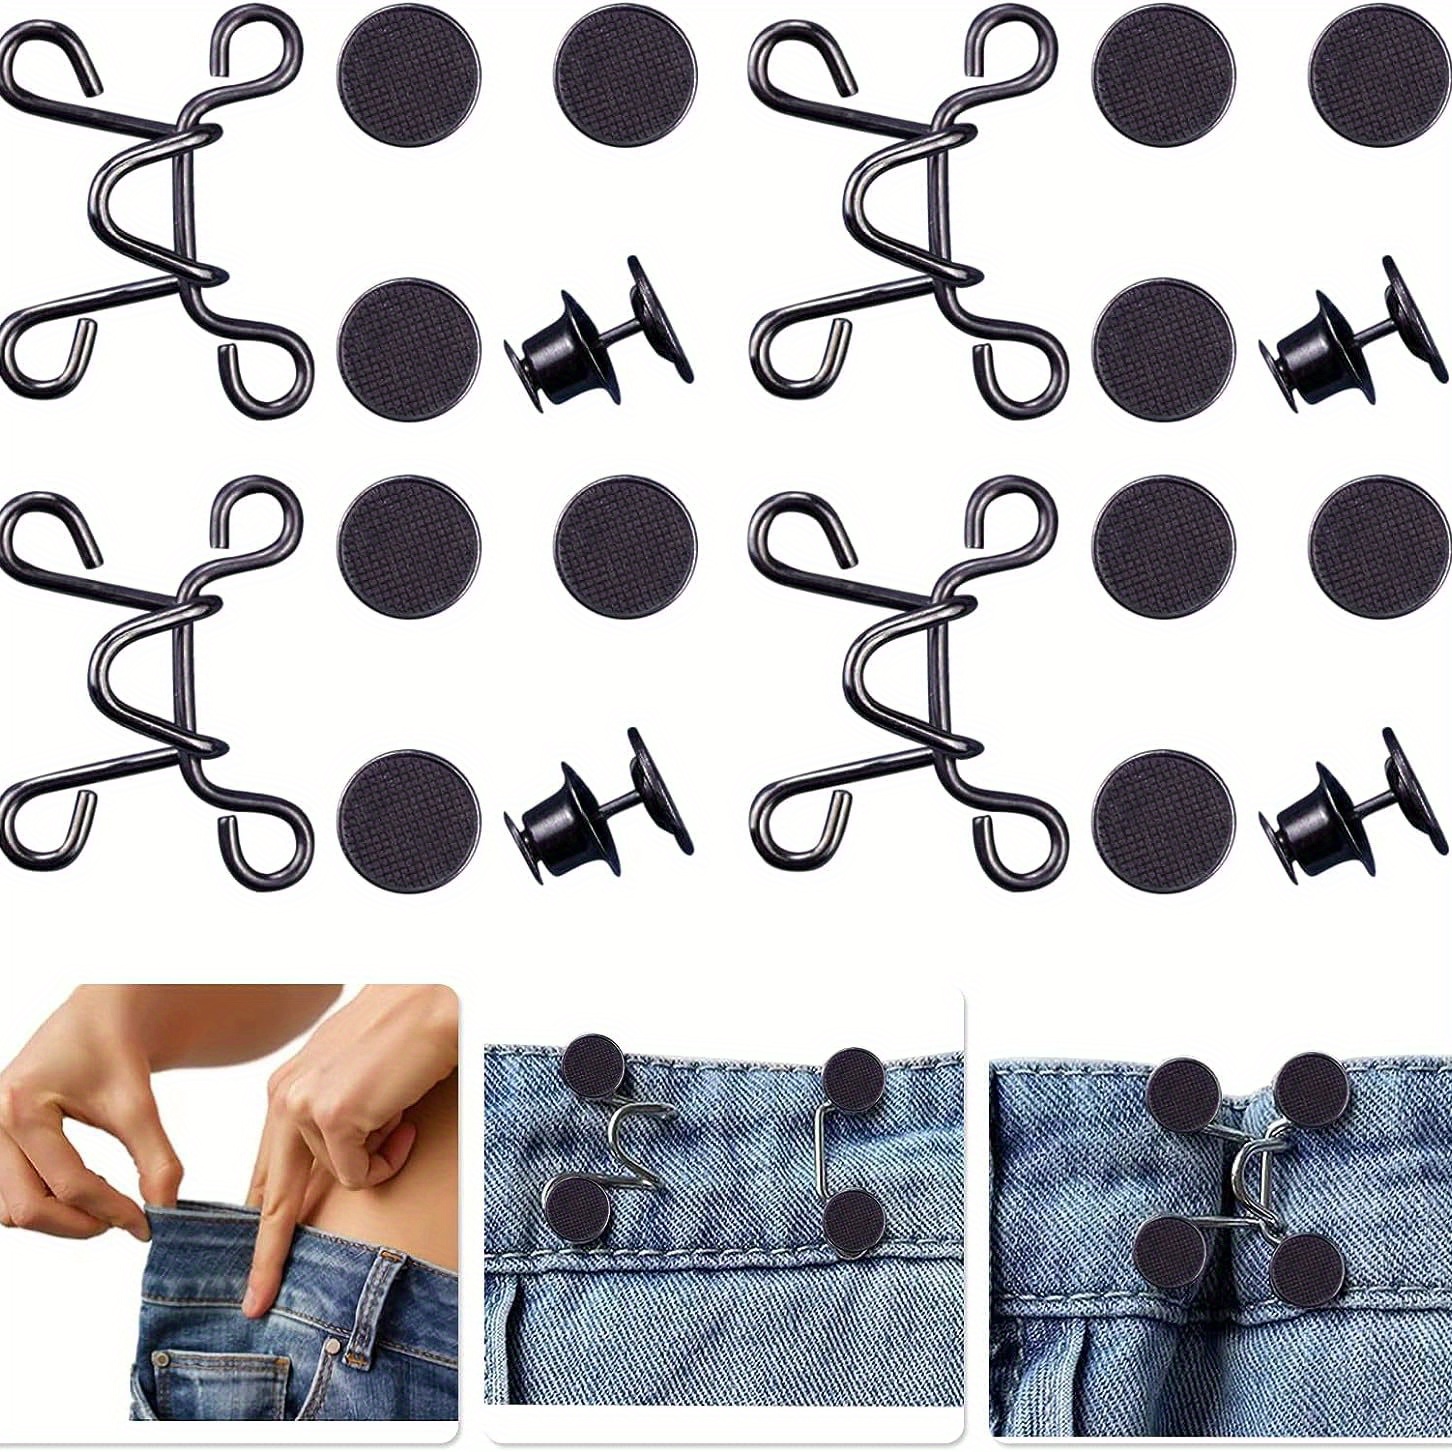 oditton 4 Set Pant Waist Tightener - Adjustable Waist Buckle Set, Button  Adjuster for Pants Skirts Jeans Sleeves, Extra Button for Jeans to Make